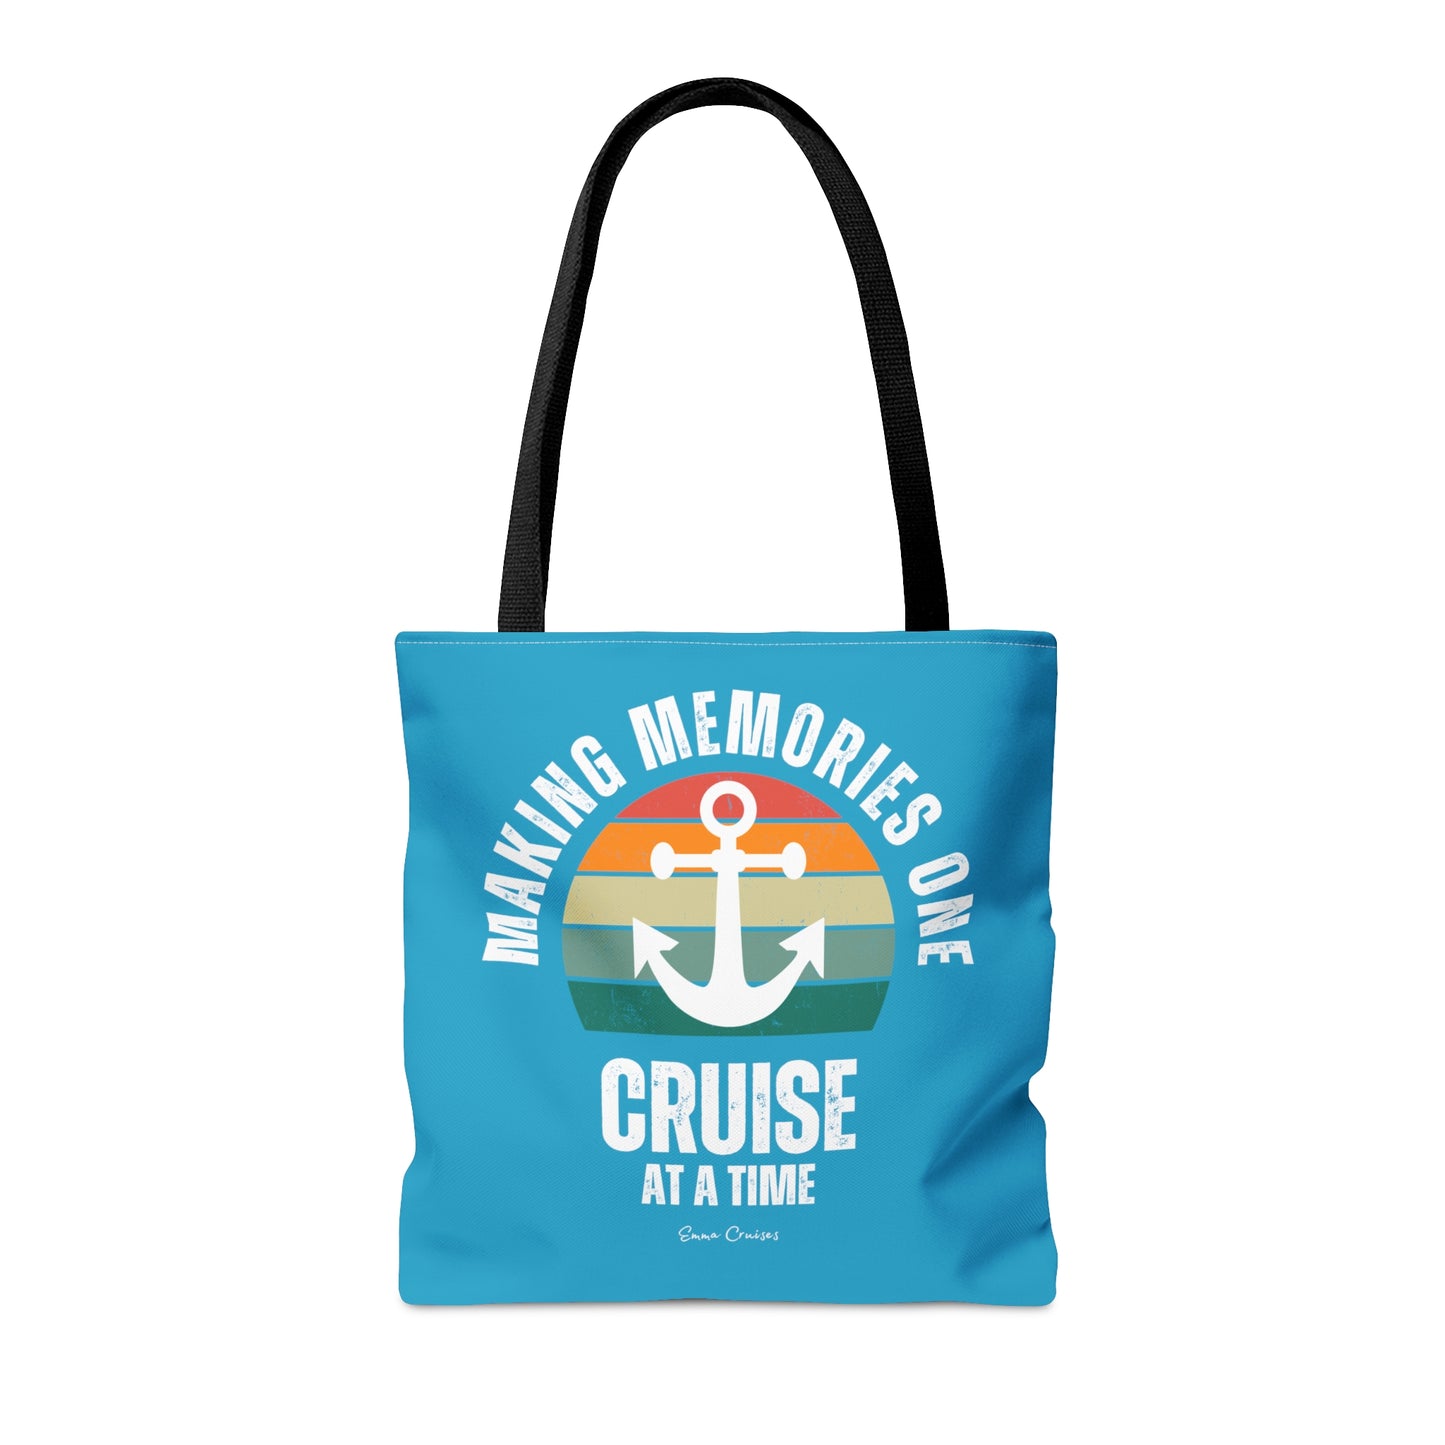 Making Memories One Cruise at a Time - Bag